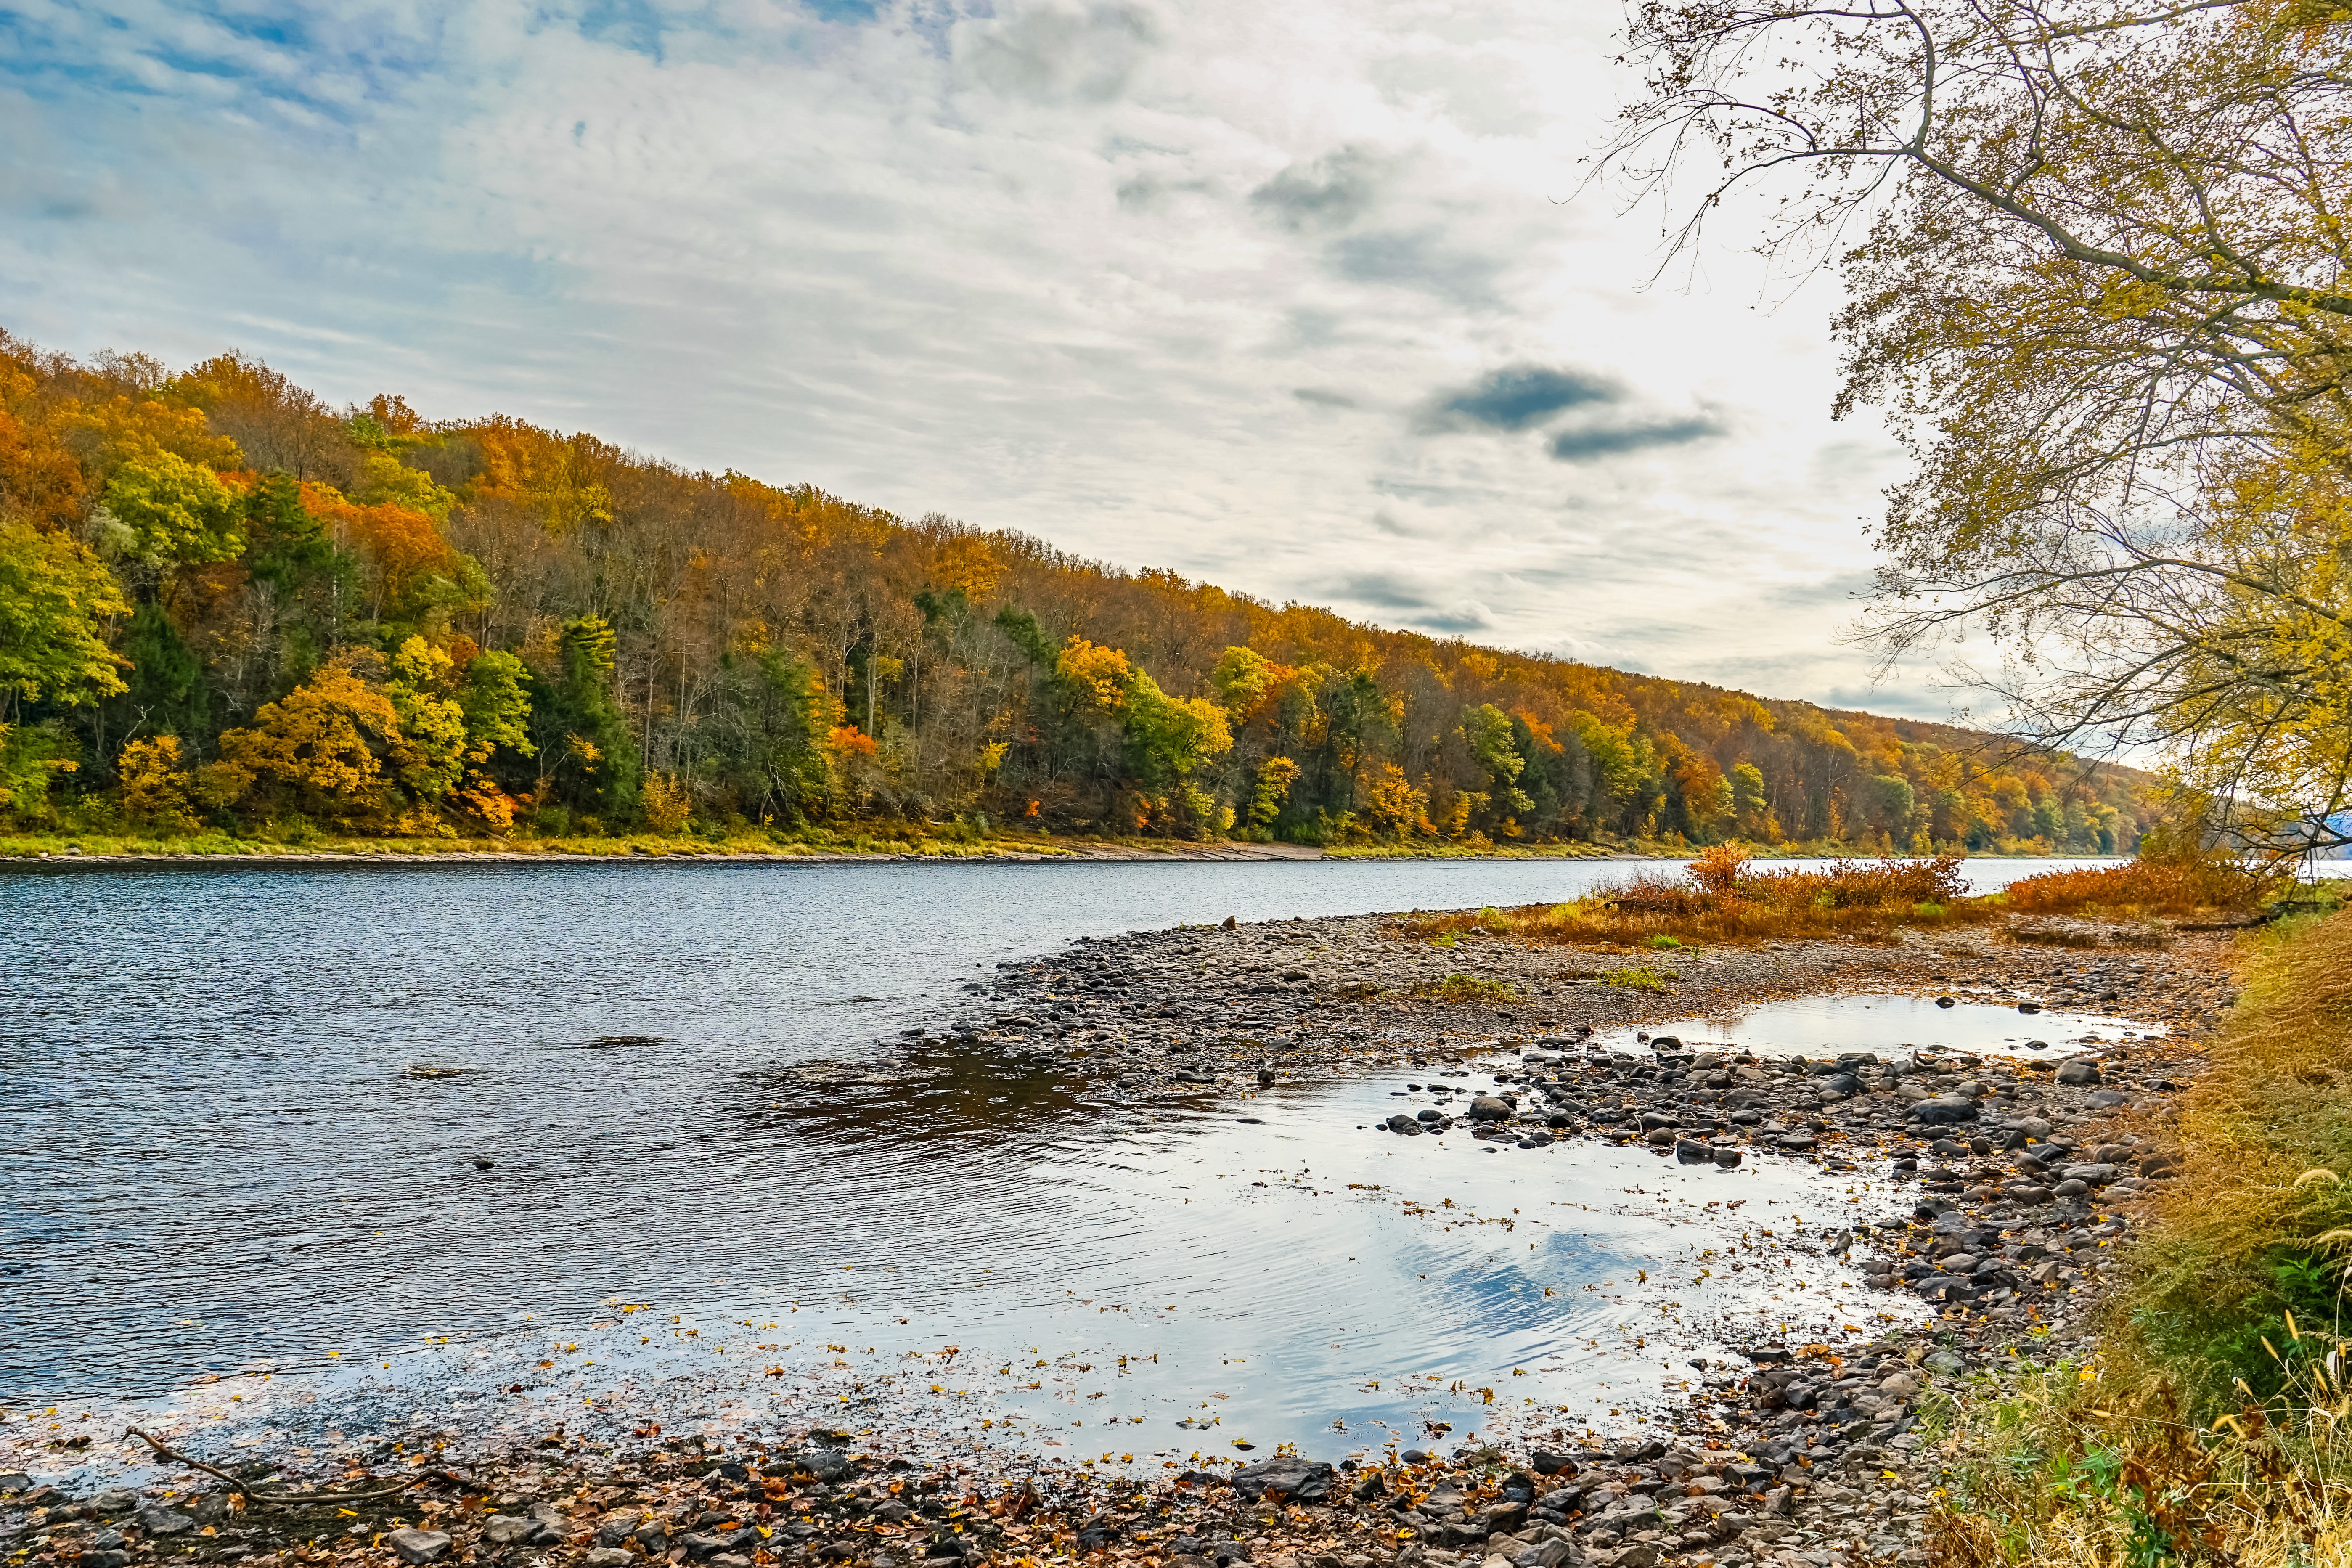 The Best Pennsylvania RV Parks to Visit in October